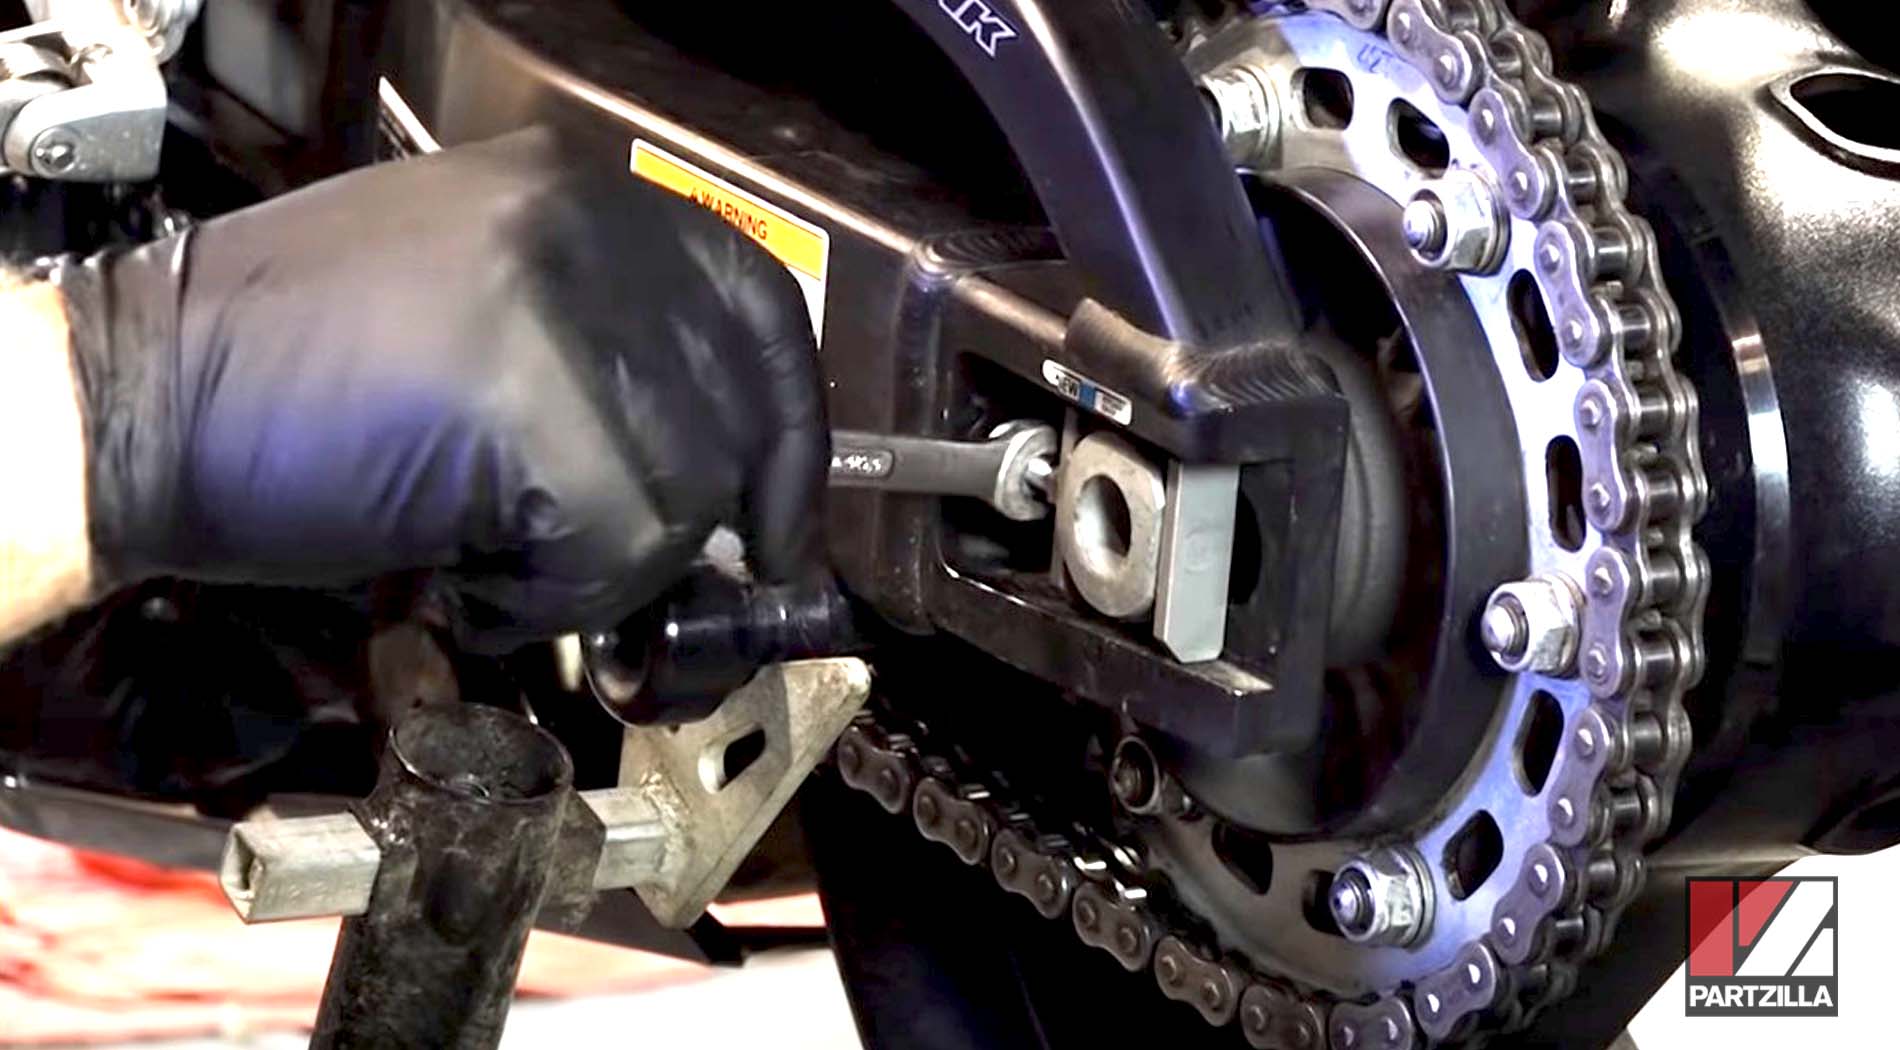 Motorcycle chain adjustment